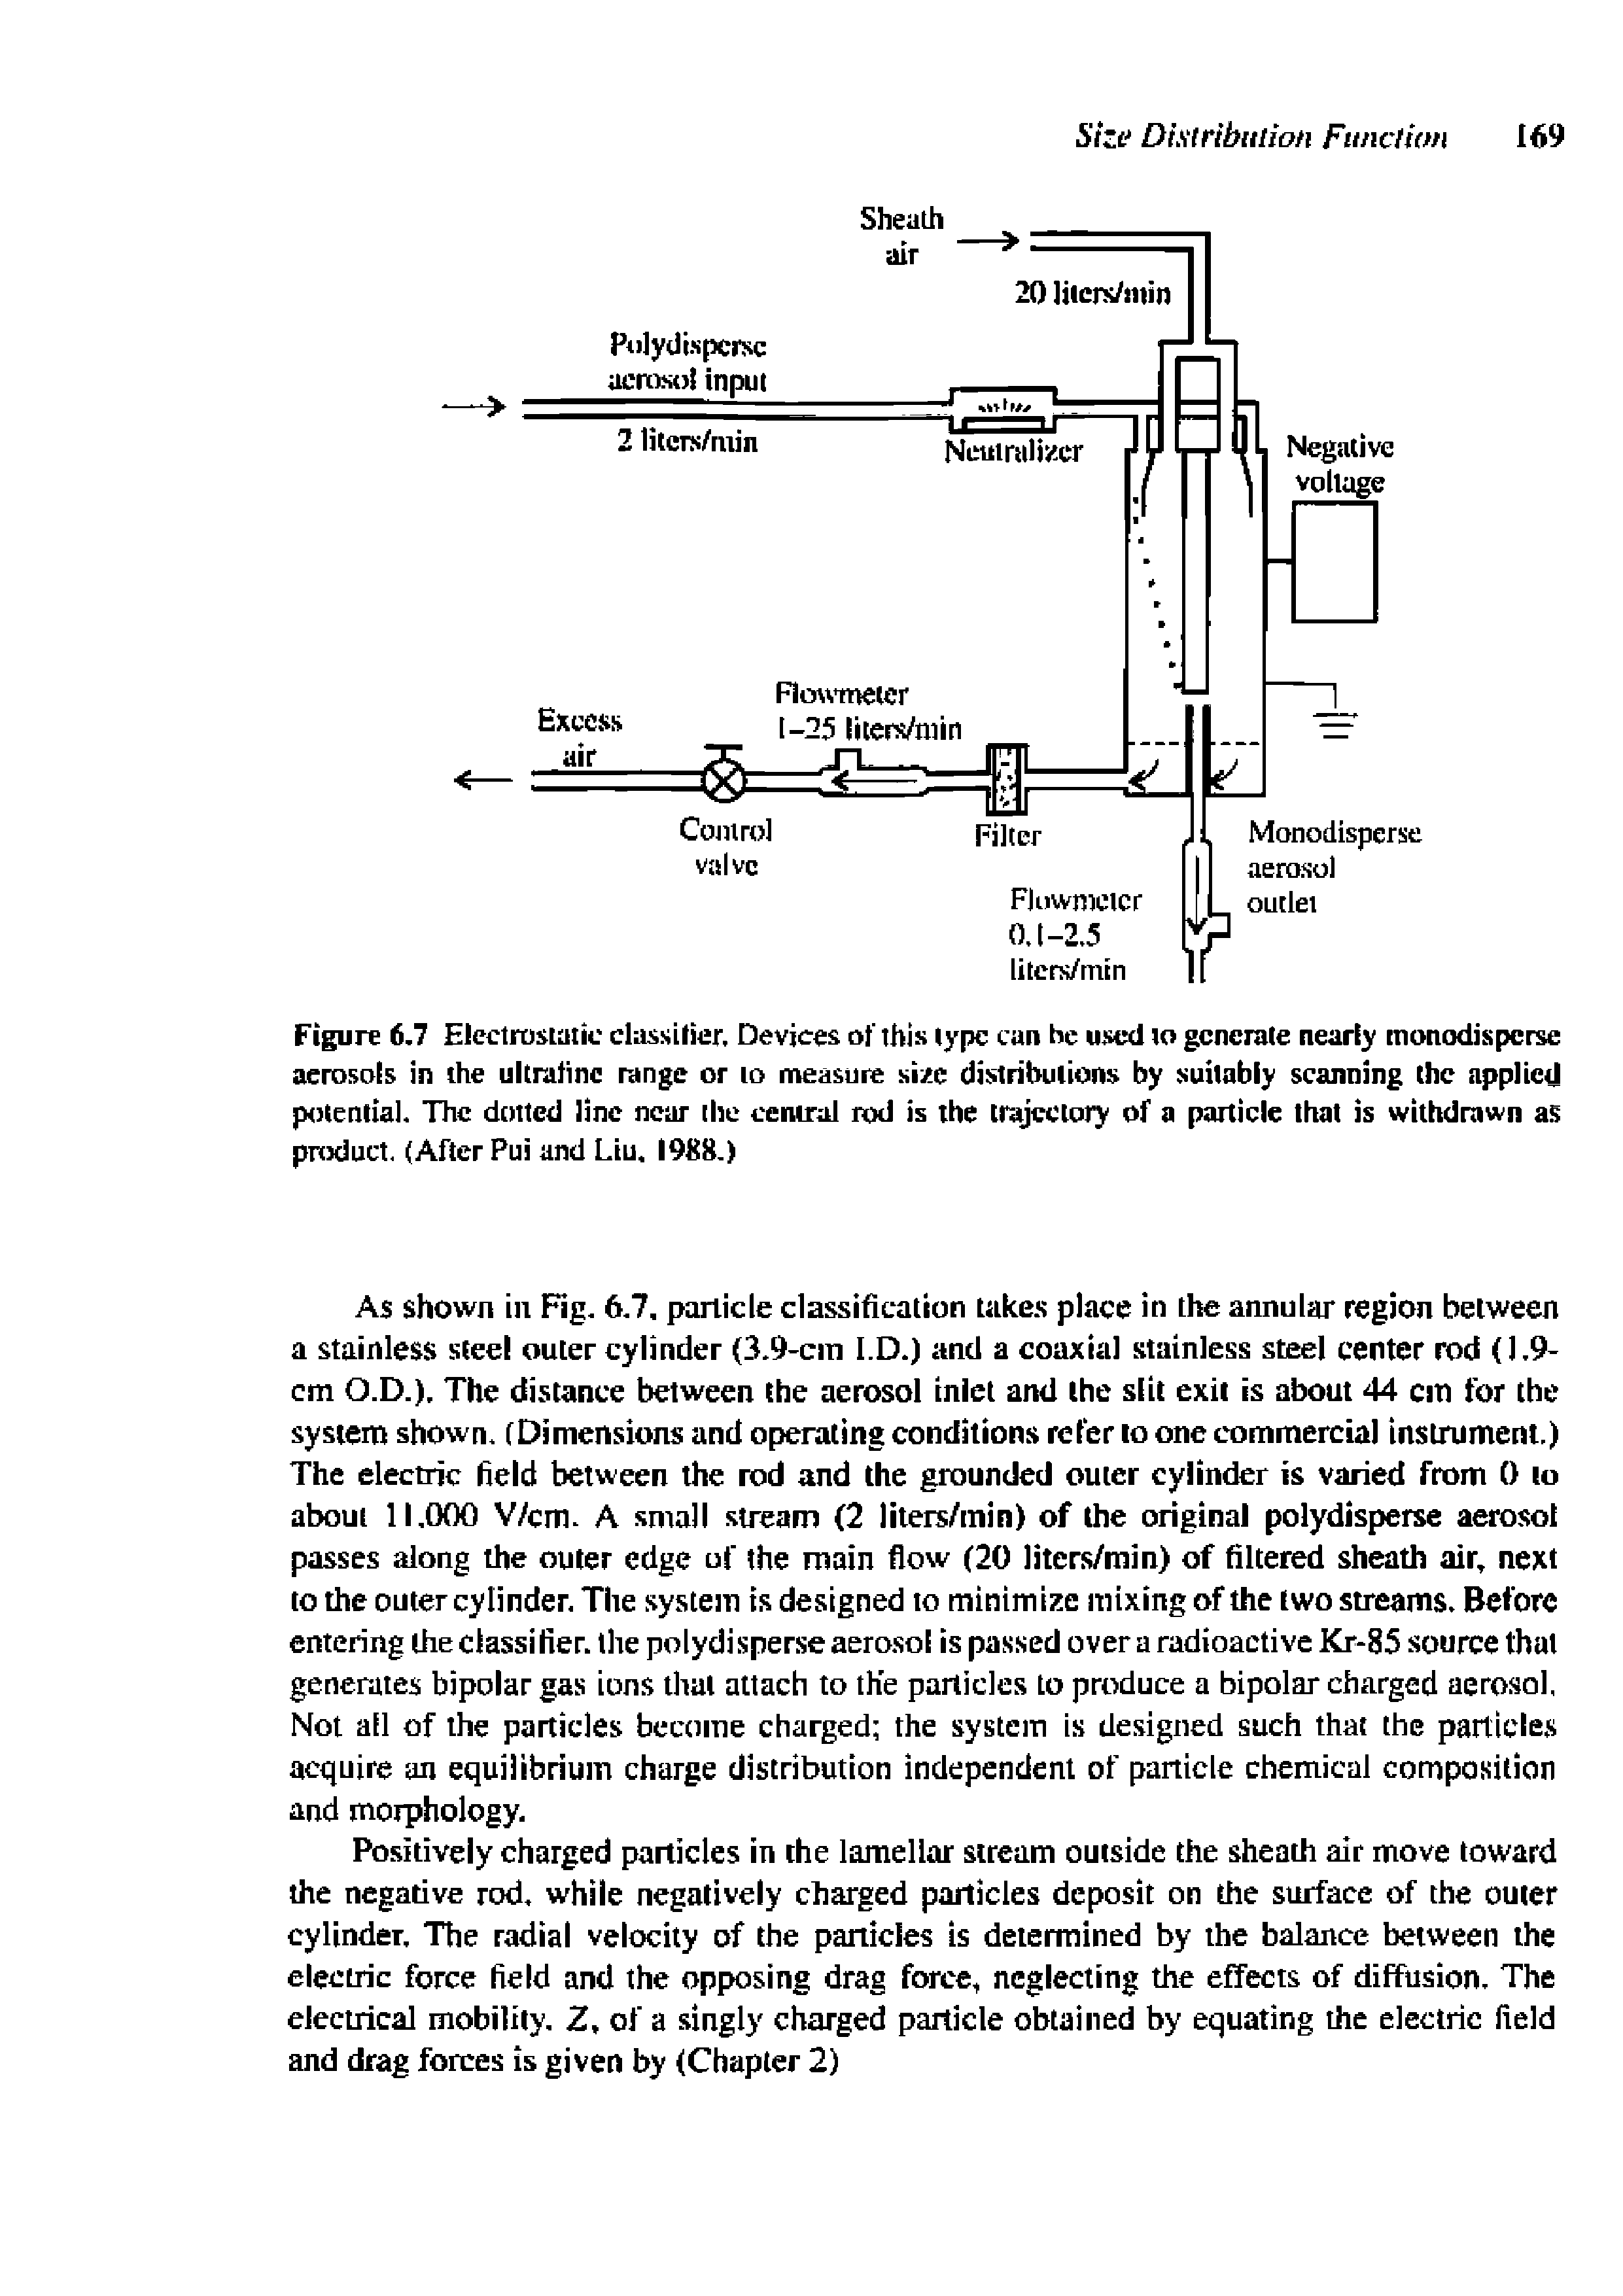 Figure 6.7 Elcctro tuiic classifier. Devices of this type cun he used io generate nearly inonodisperse aerosols in the ultnitinc range or lo measure si/c distributions by suitably scanning the applied potential. The dotted line near the central n>d is the trajecioty of a particle that is withdrawn as pniduct. (After Pui and Liu. 1988.)...